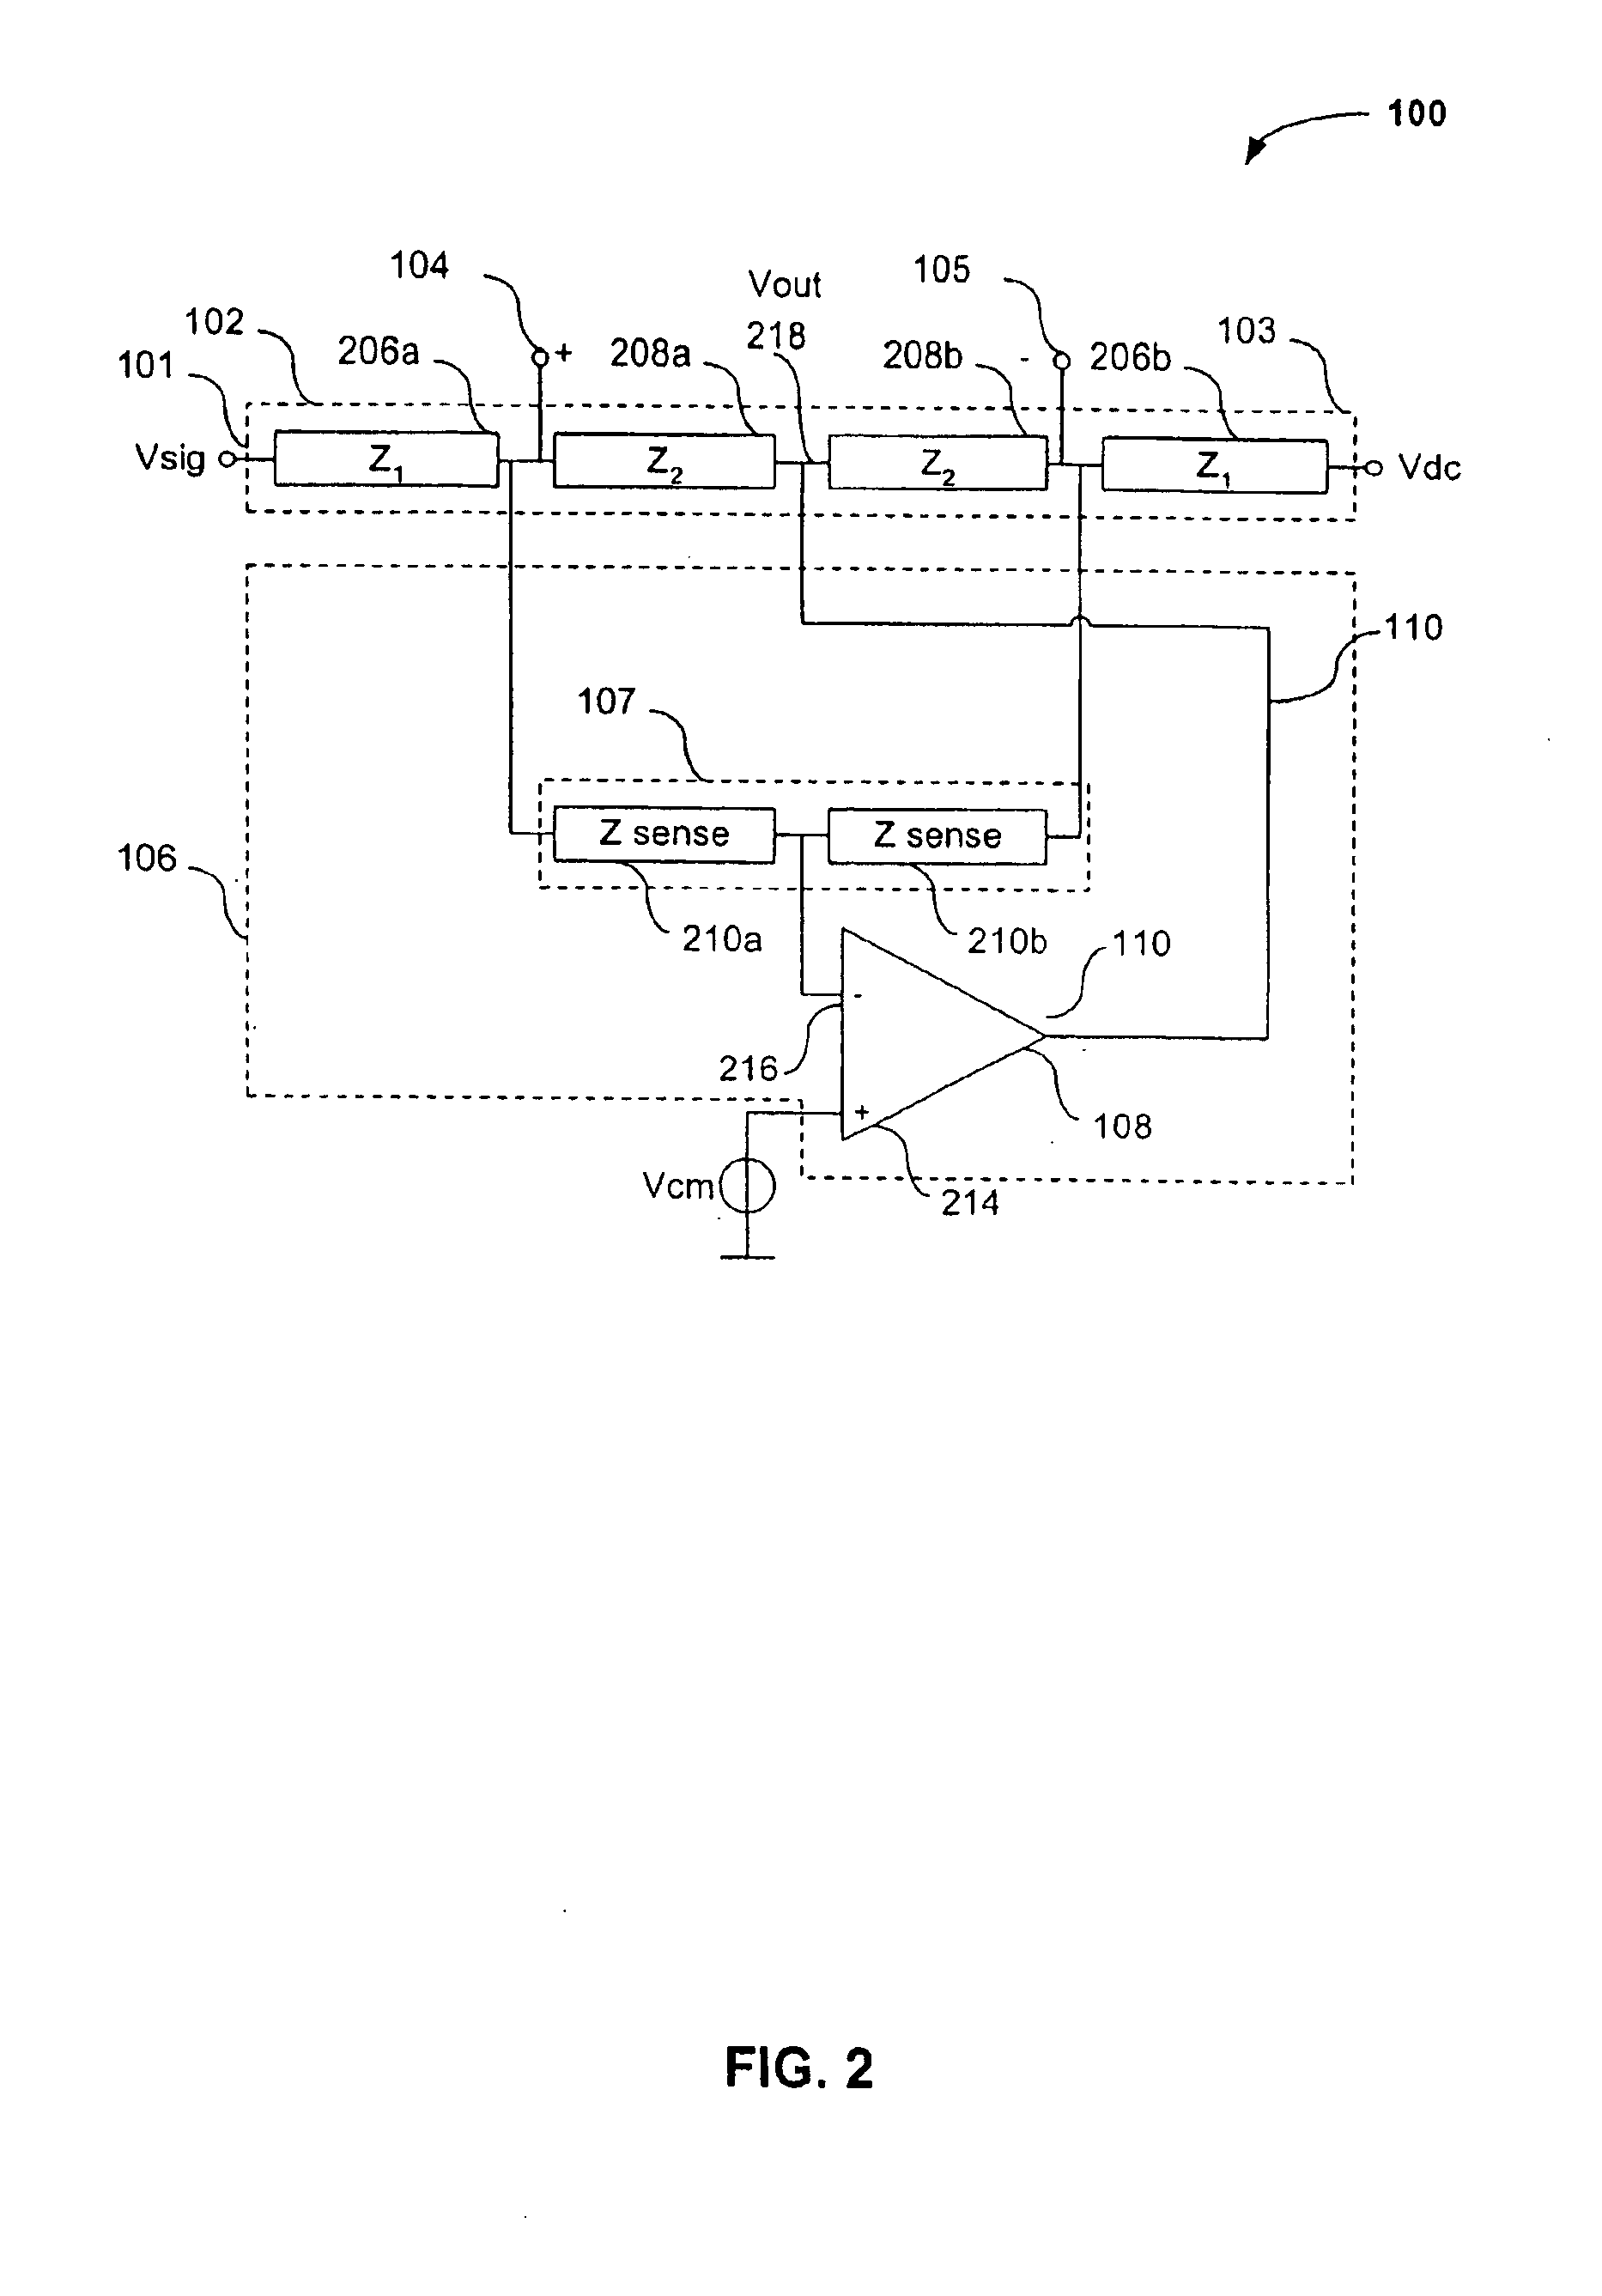 Single-ended-to-differential converter with common-mode voltage control